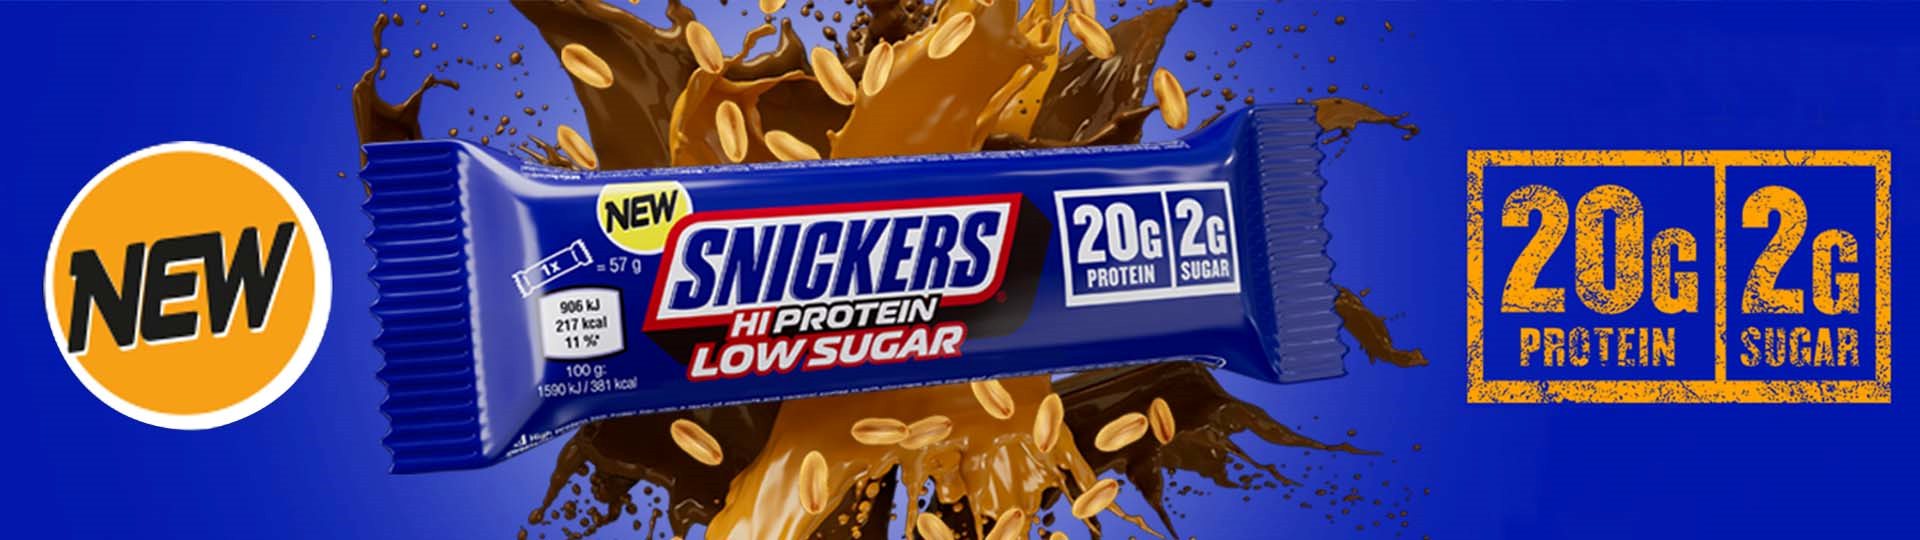 Snickers LOW SUGAR